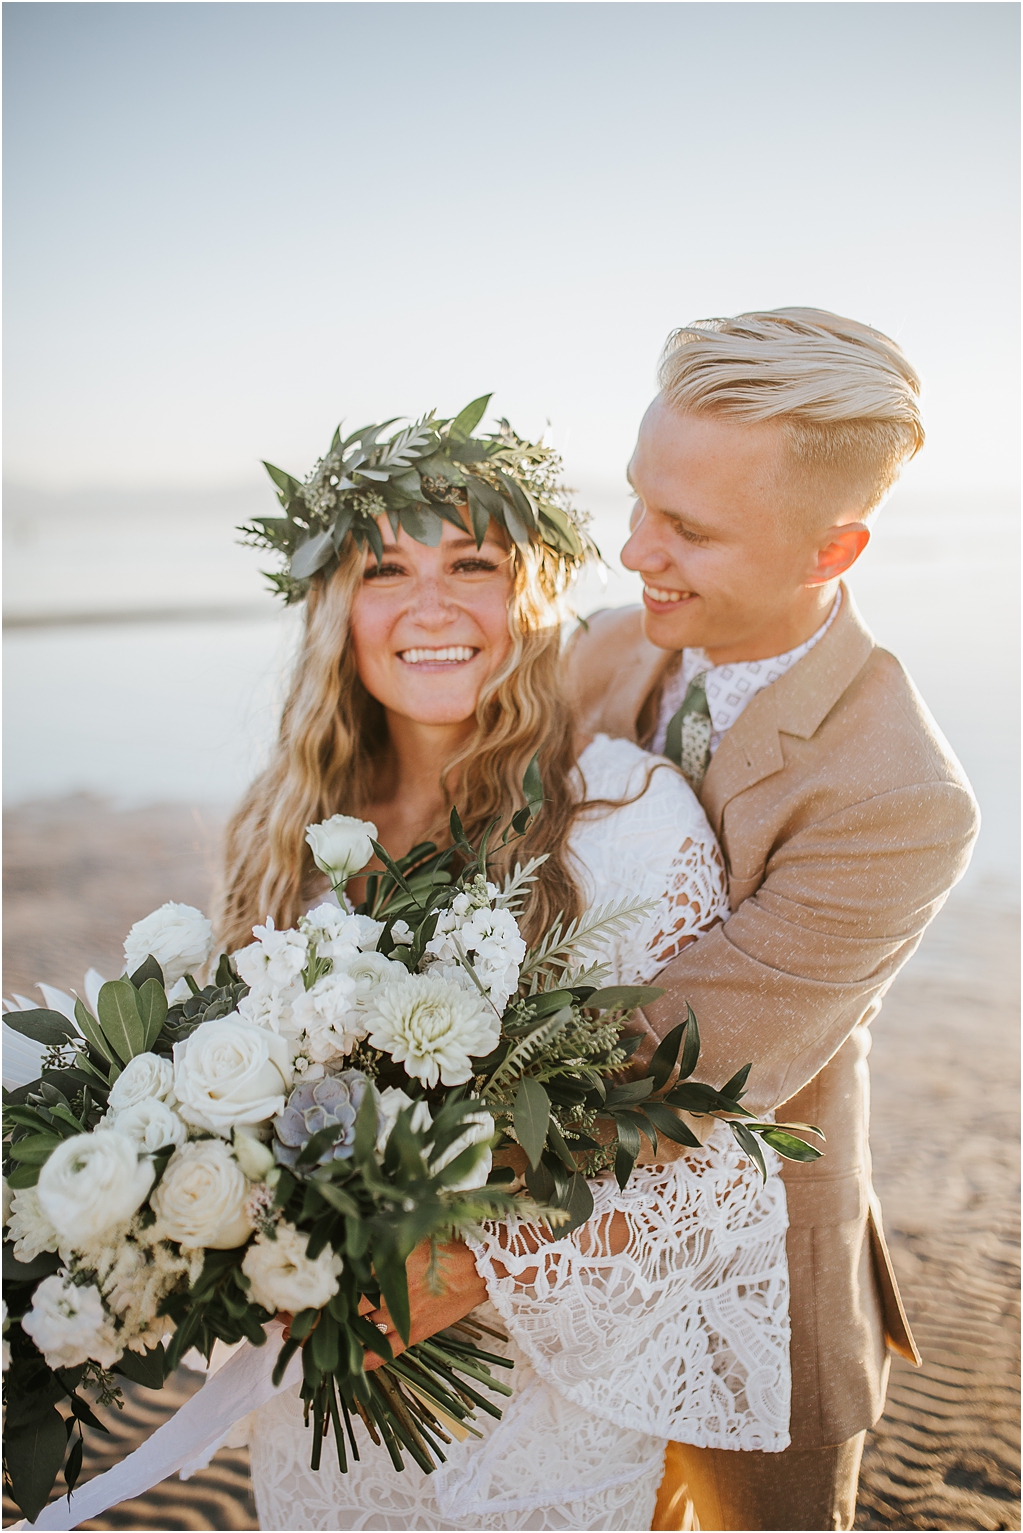 Sacramento wedding photographer captures bride and groom for their boho bridals with groom hugging bride from behind and smiling at her as she looks at the camera and smiles, bride wearing a flower crown and a lace bohemian wedding dress with a large white rose bouquet